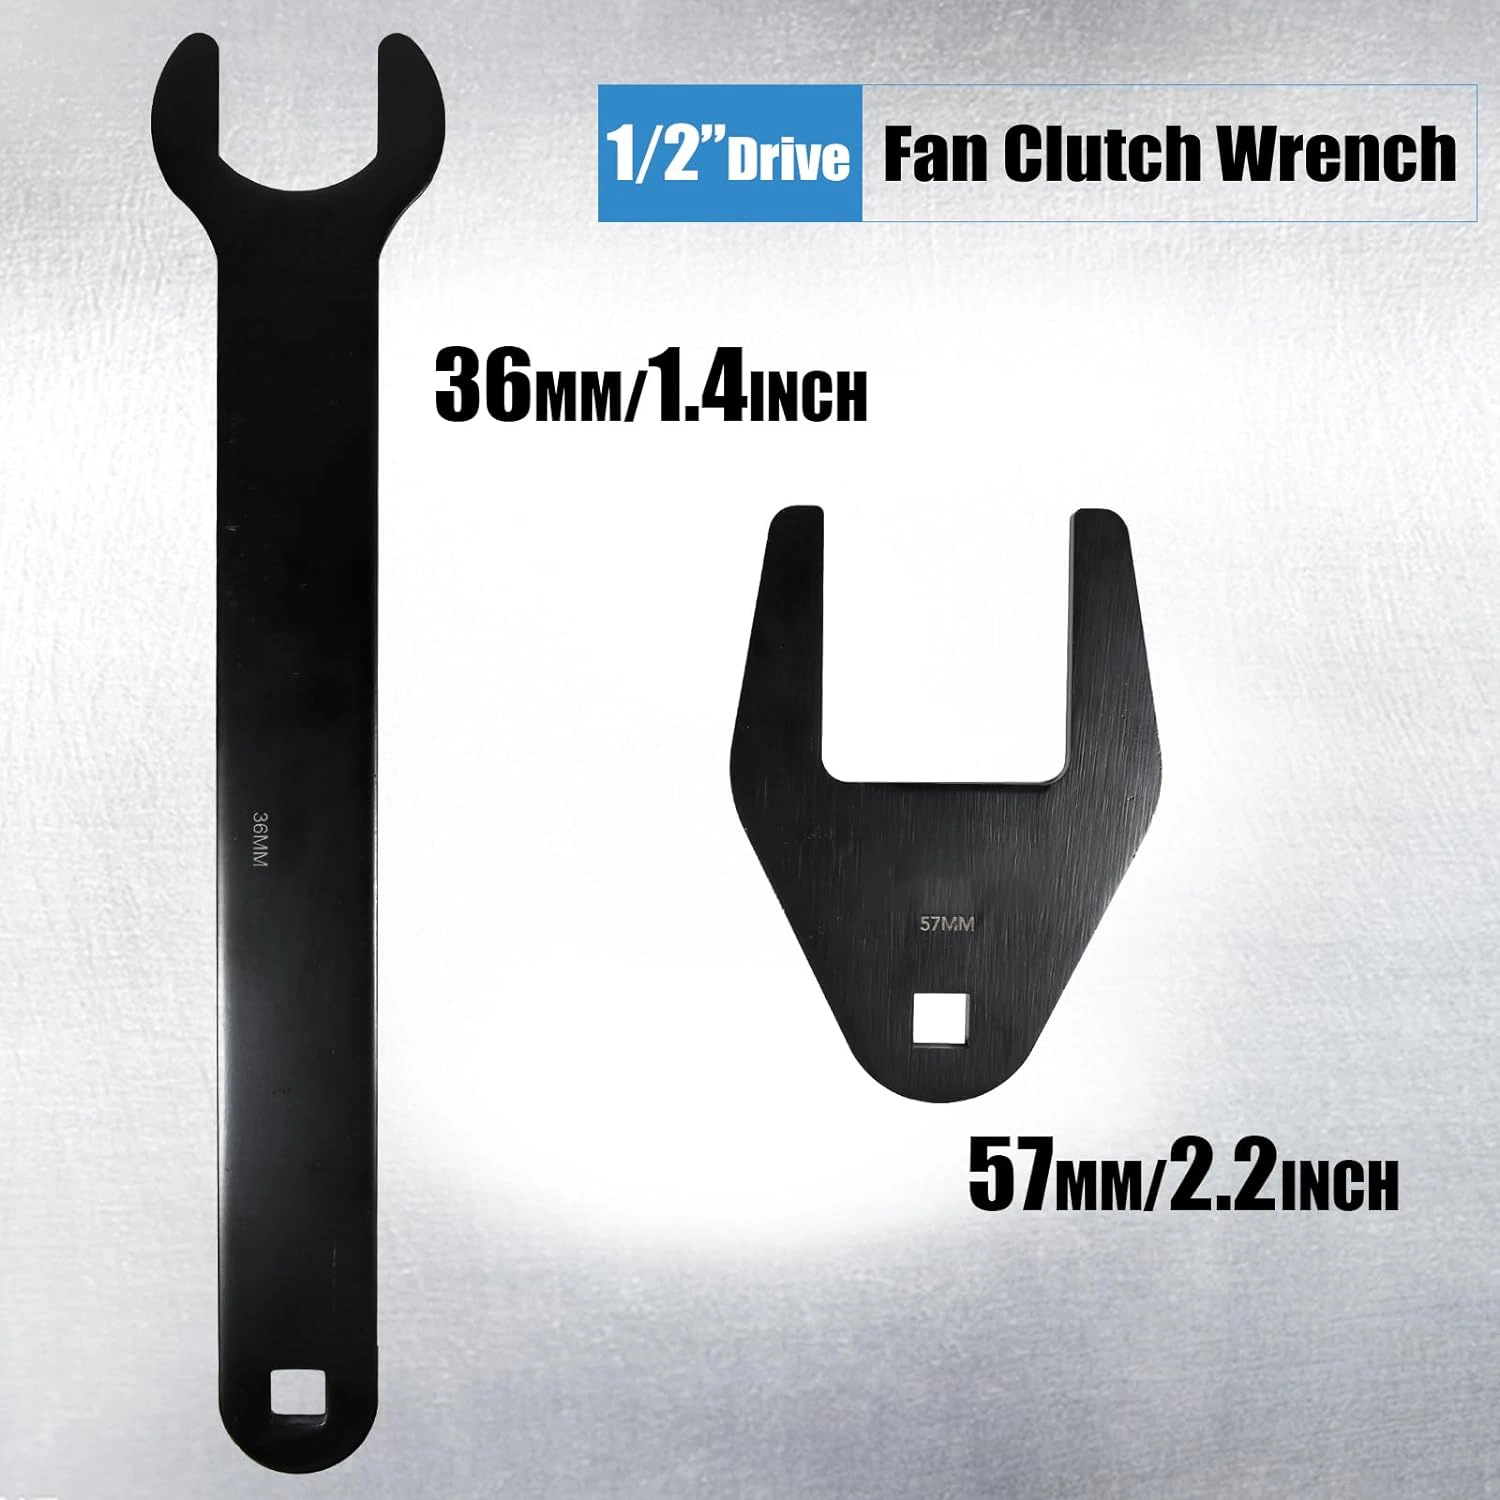 2PCS Fan Clutch Wrench Set for Use with Ford Vehicles Metal